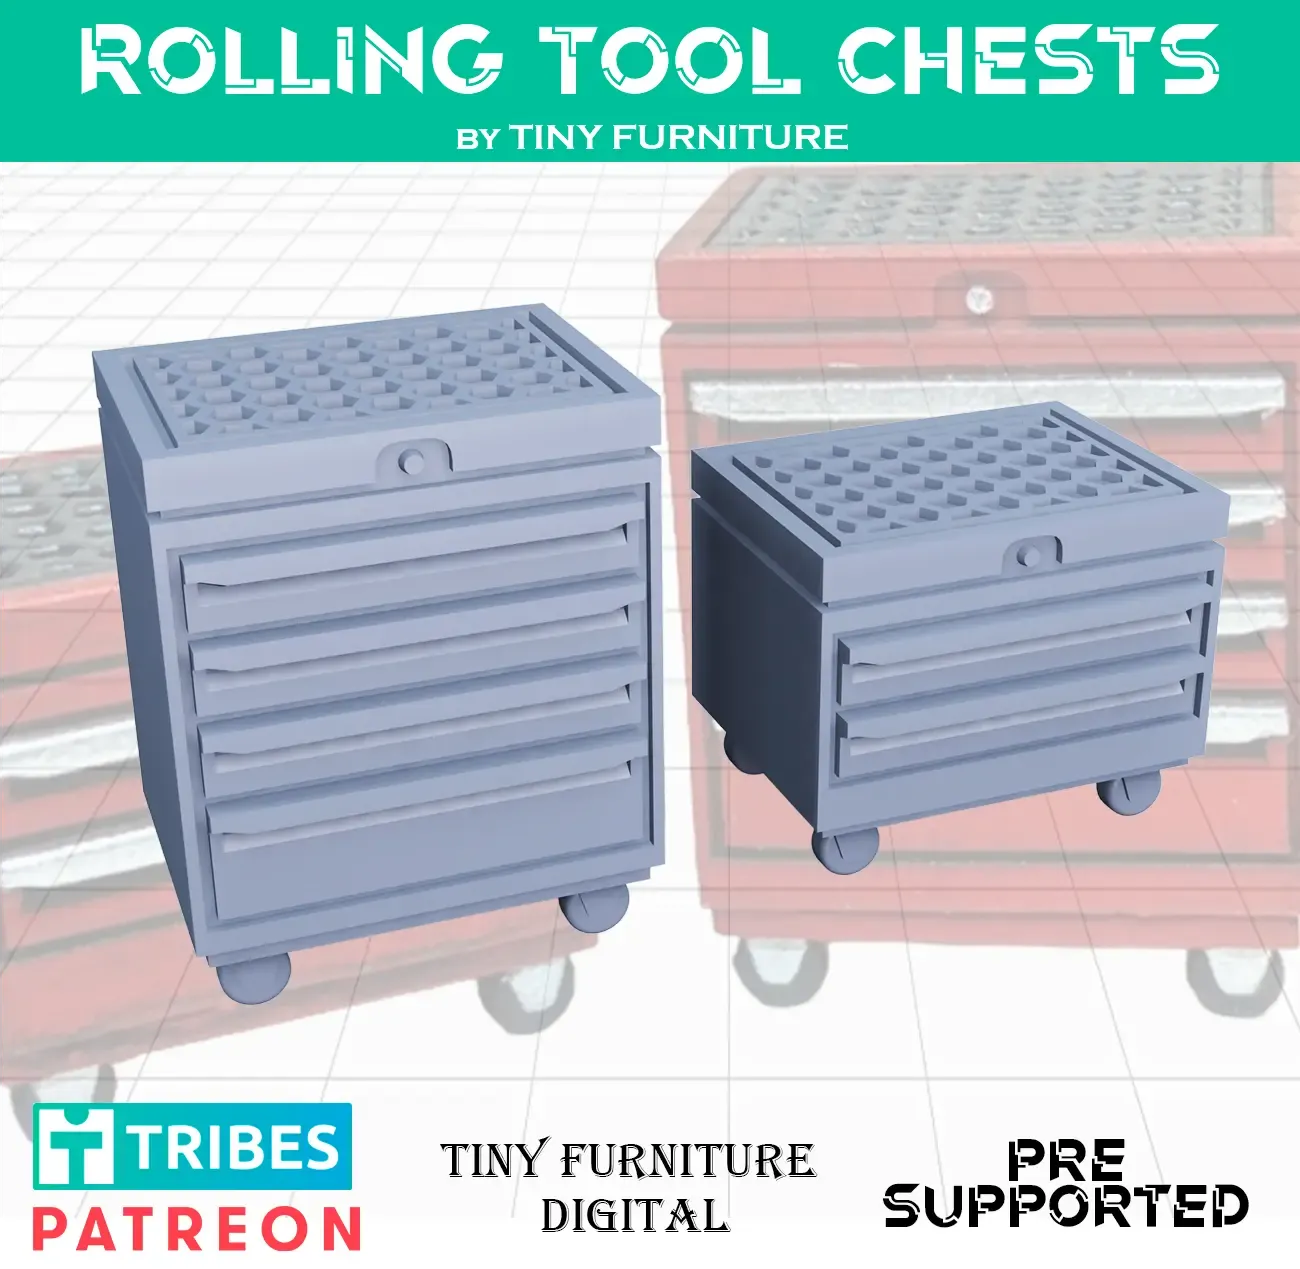 Rolling tool chests